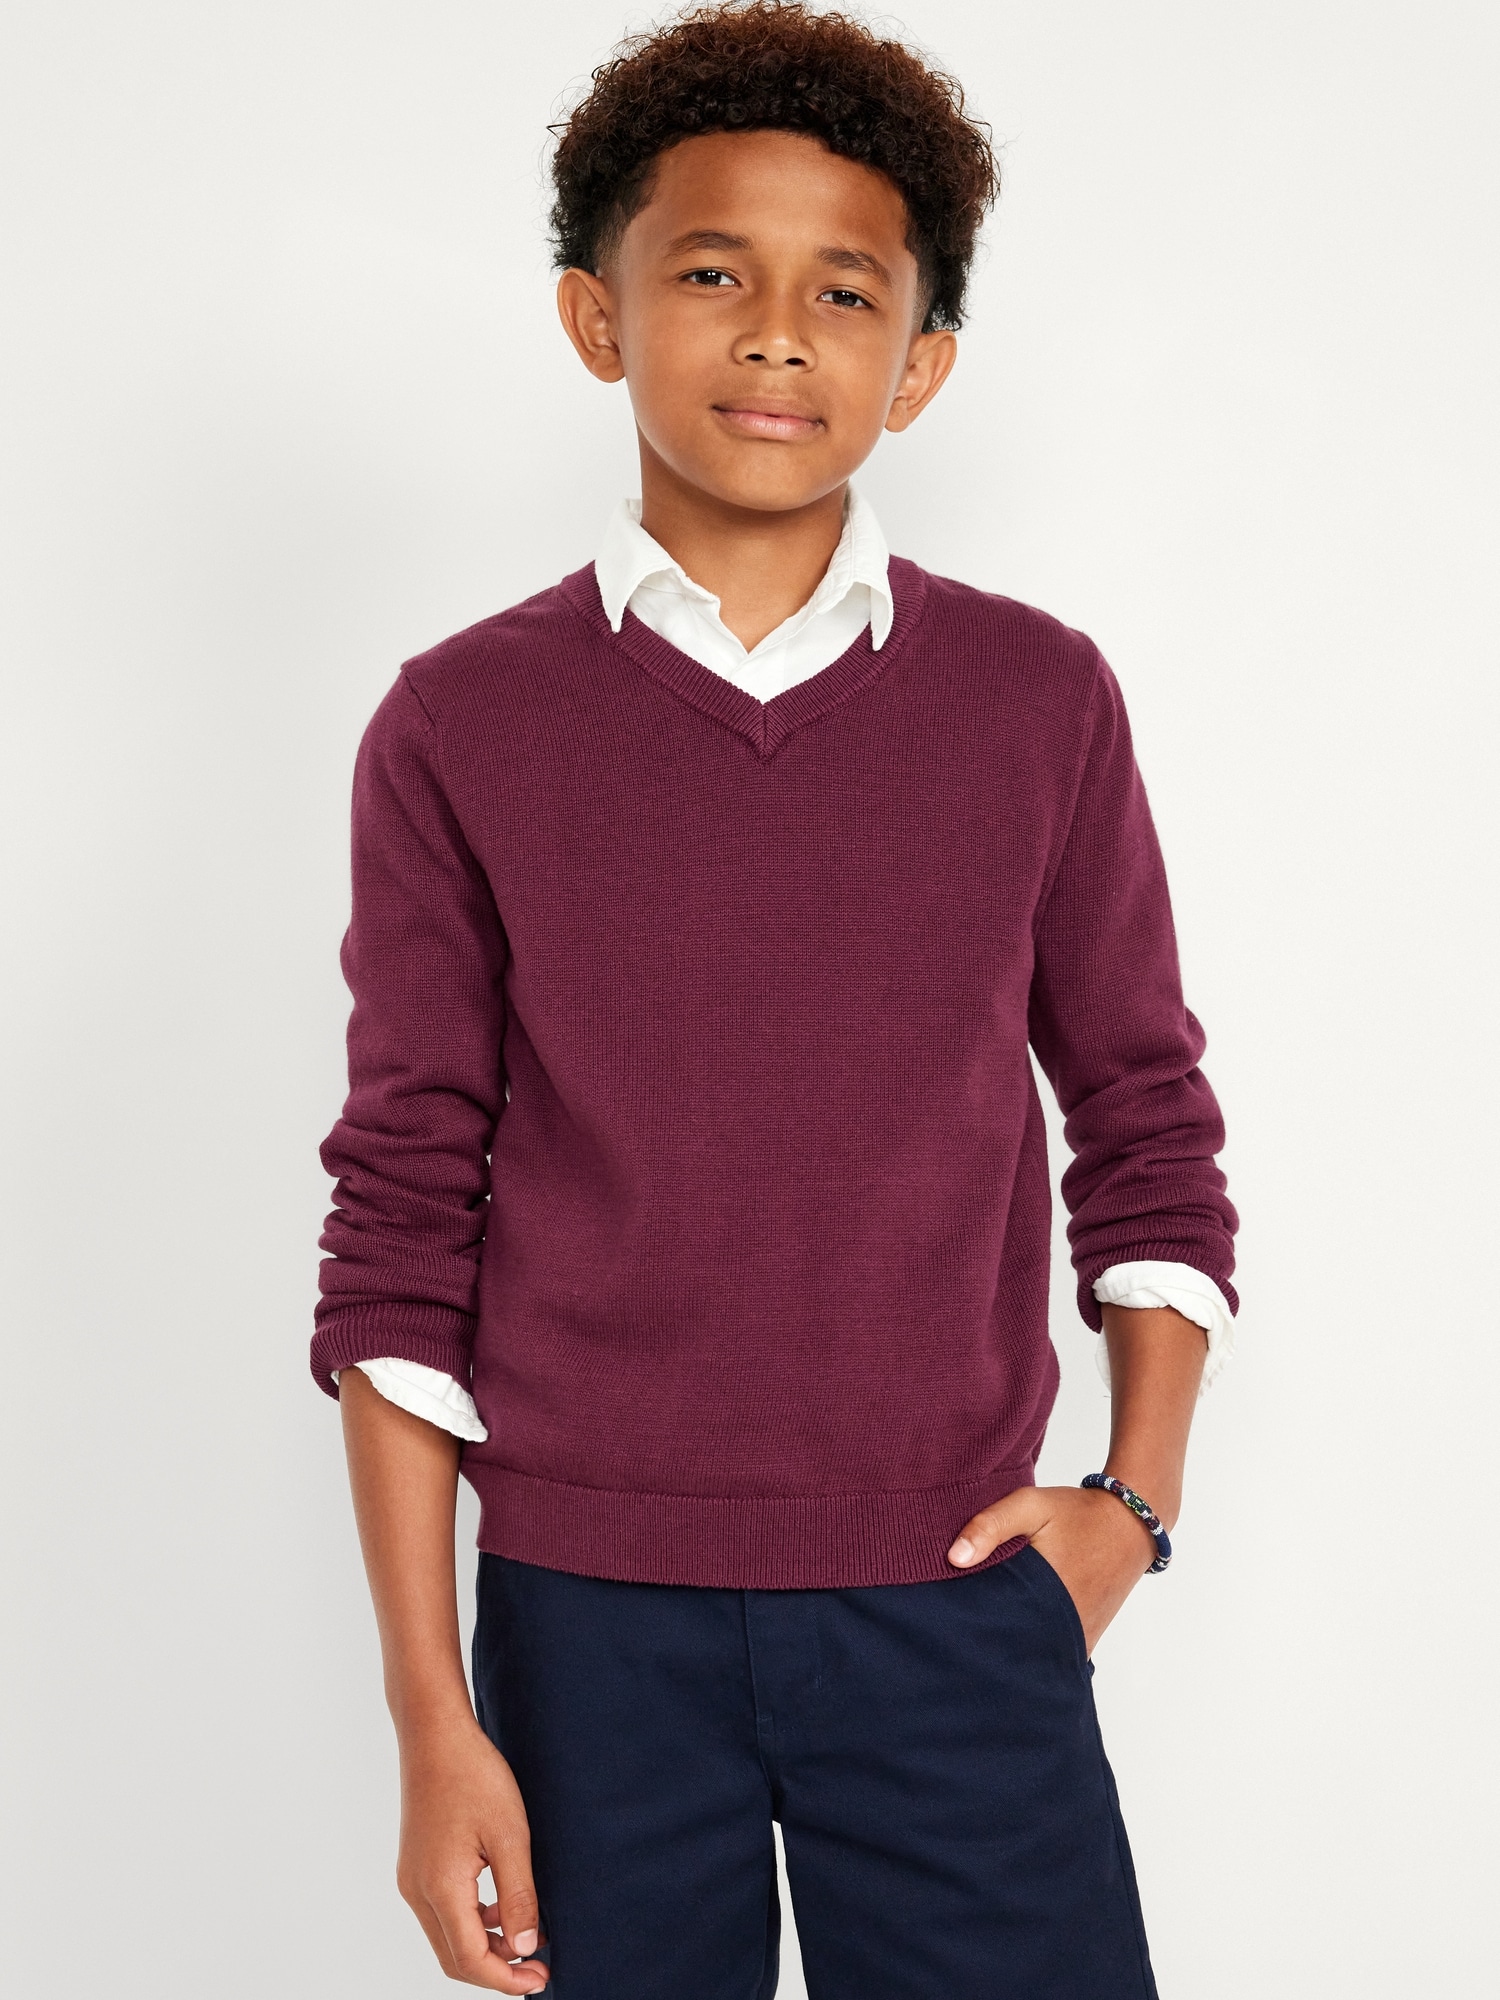 Long-Sleeve Solid V-Neck Sweater for Boys Hot Deal